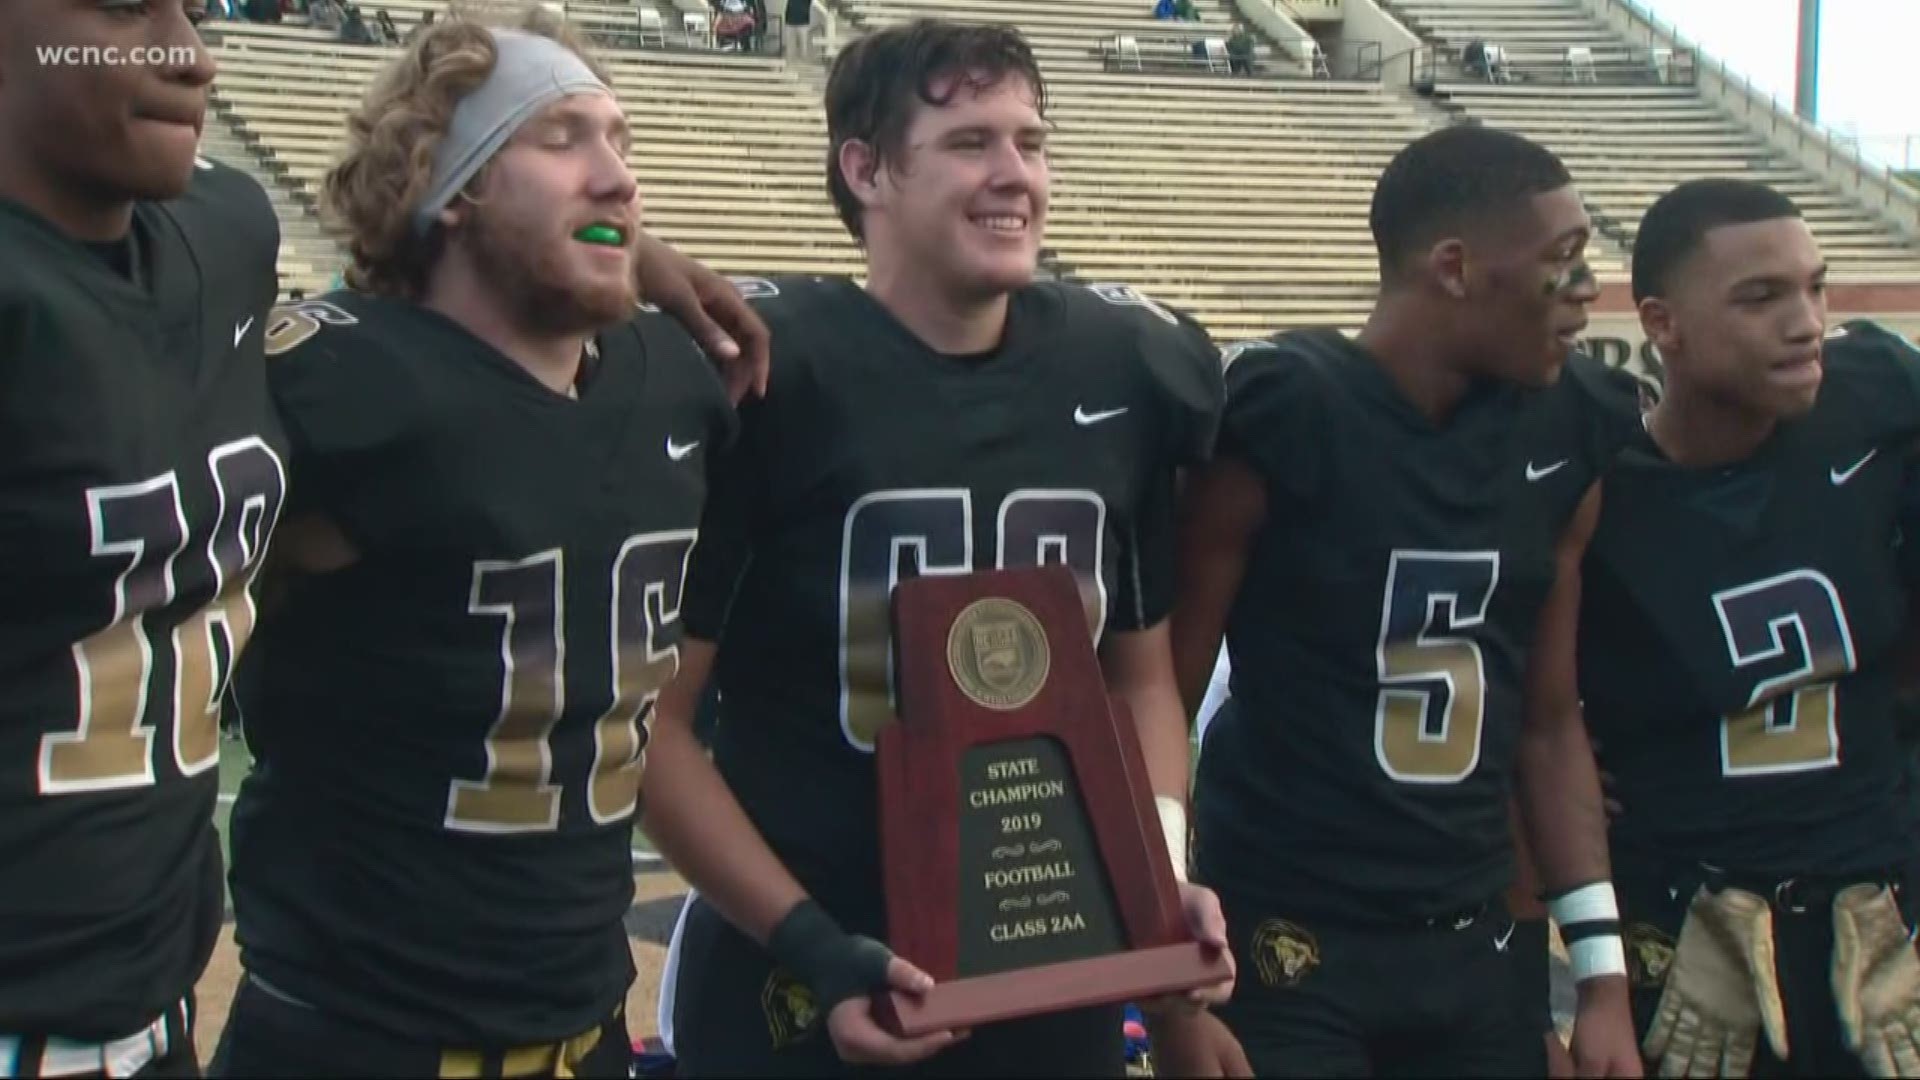 Five area high schools competed for a football state championship on Saturday.